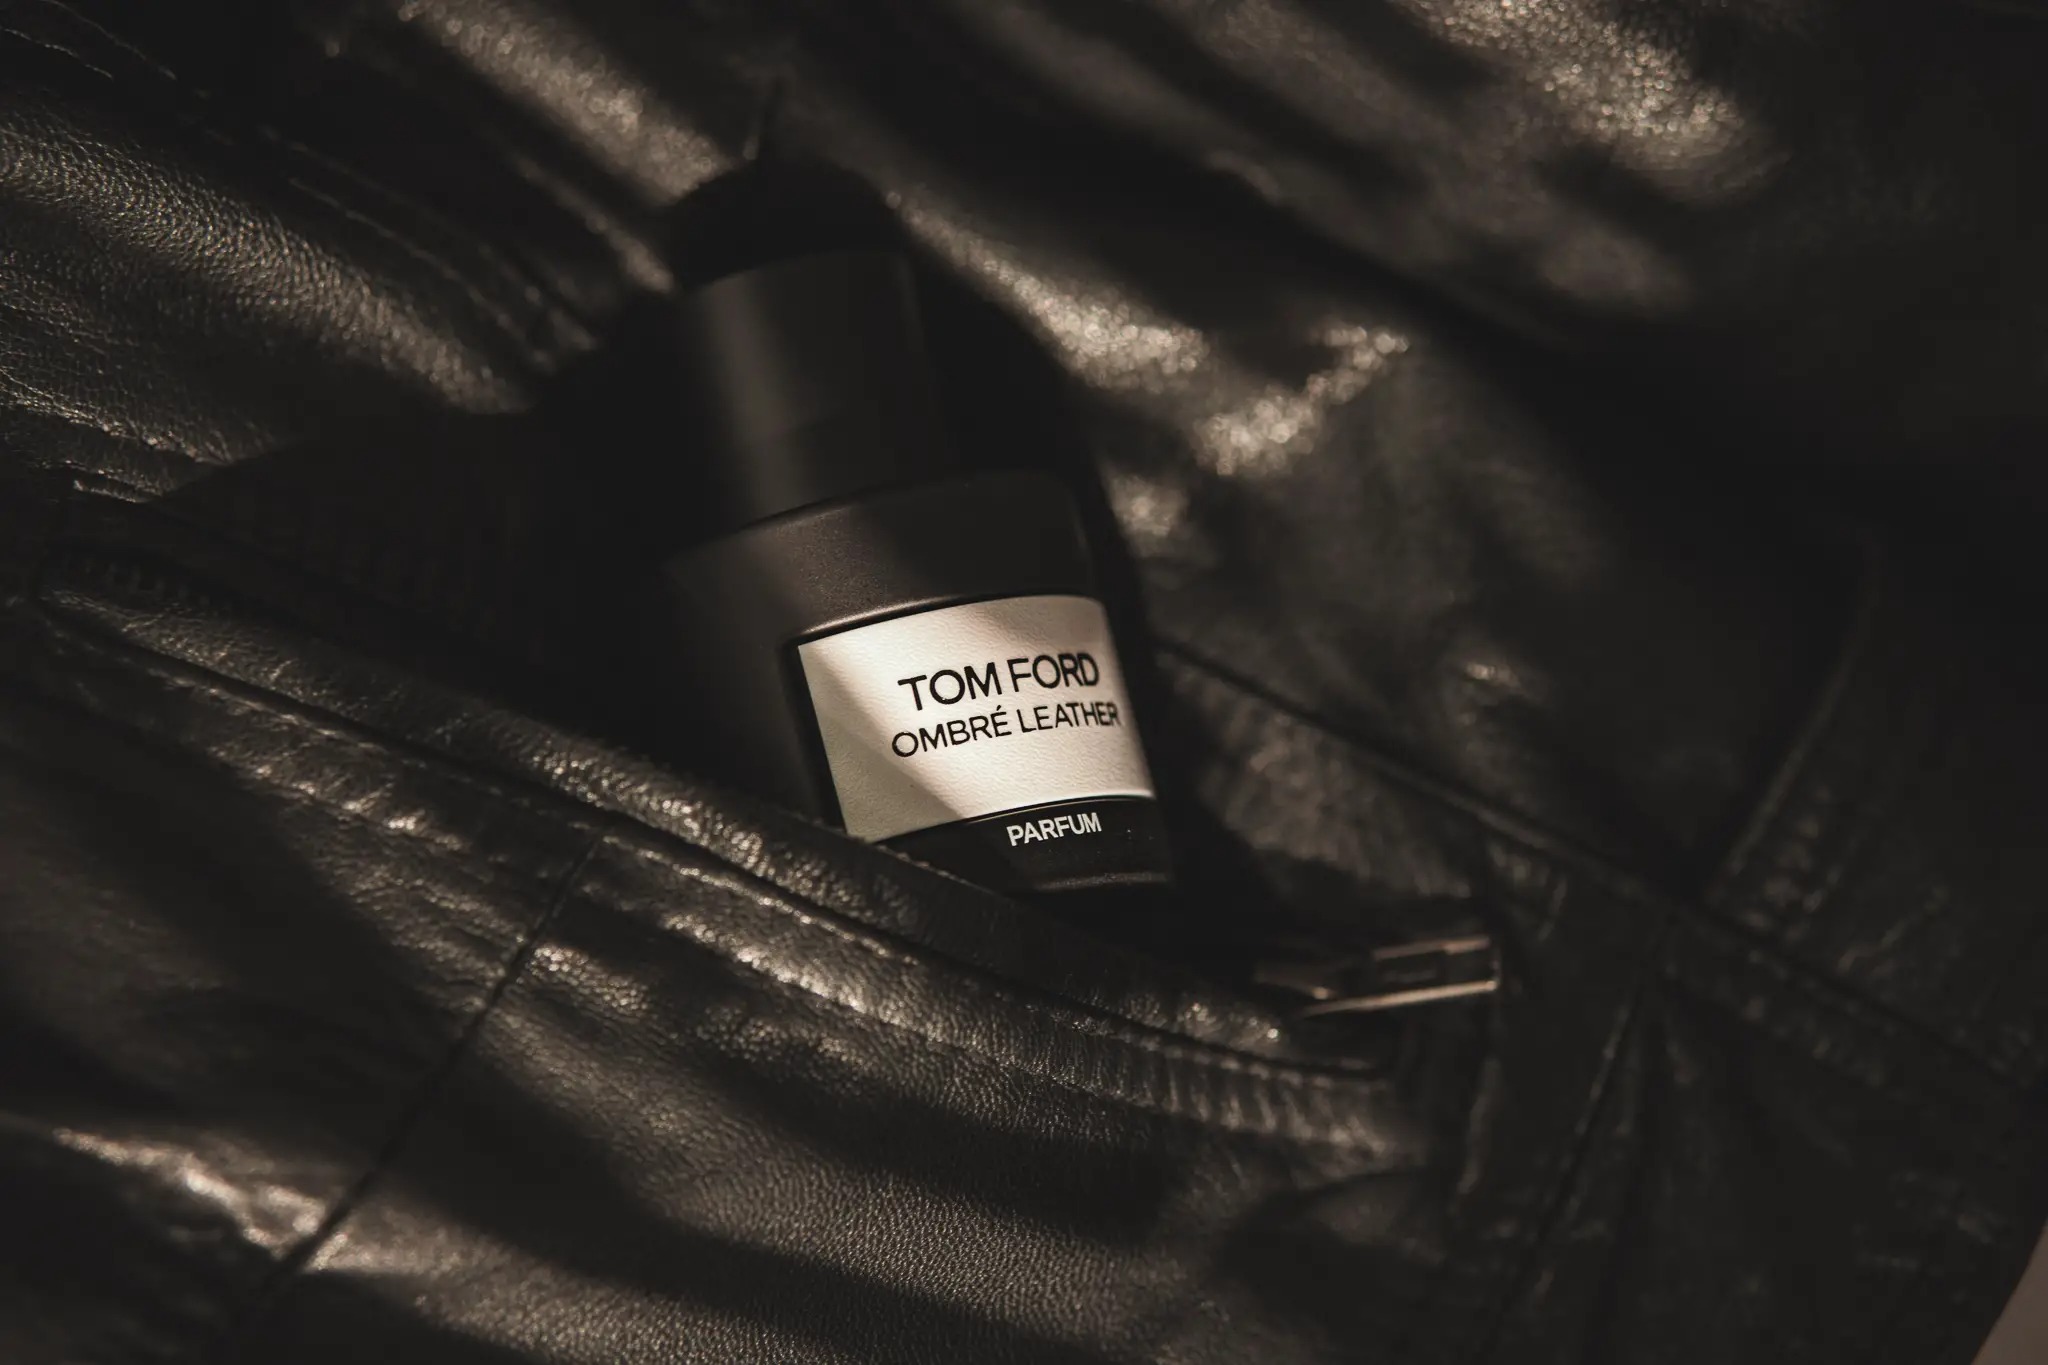 tom ford ombre leather parfum review